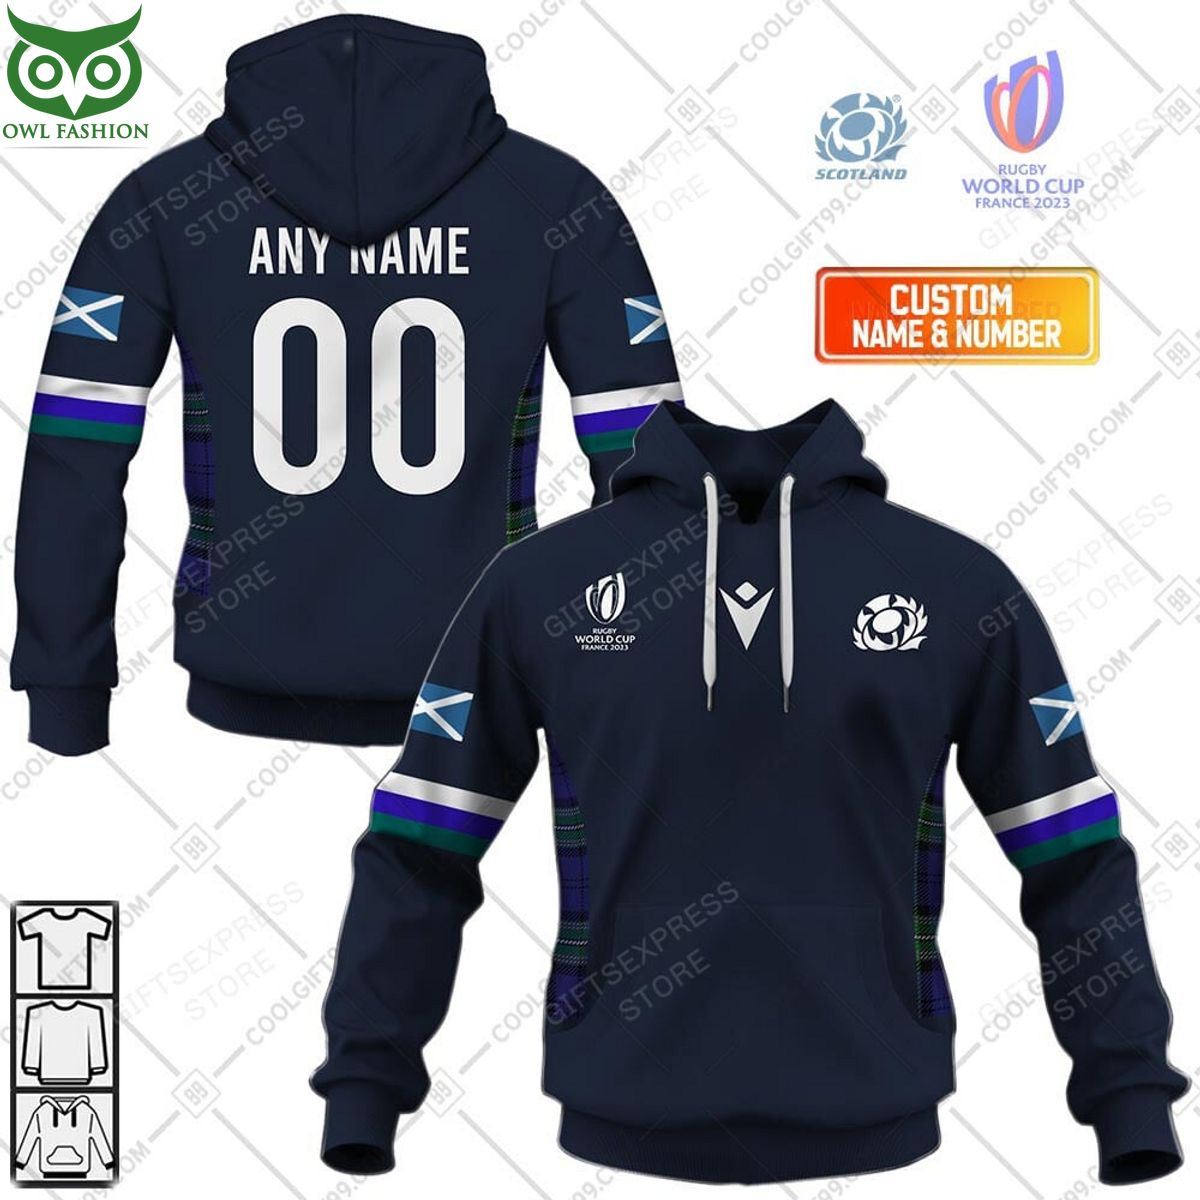 rugby world cup scotland home jersey personalized 3d hoodie tshirt 1 Yhxus.jpg